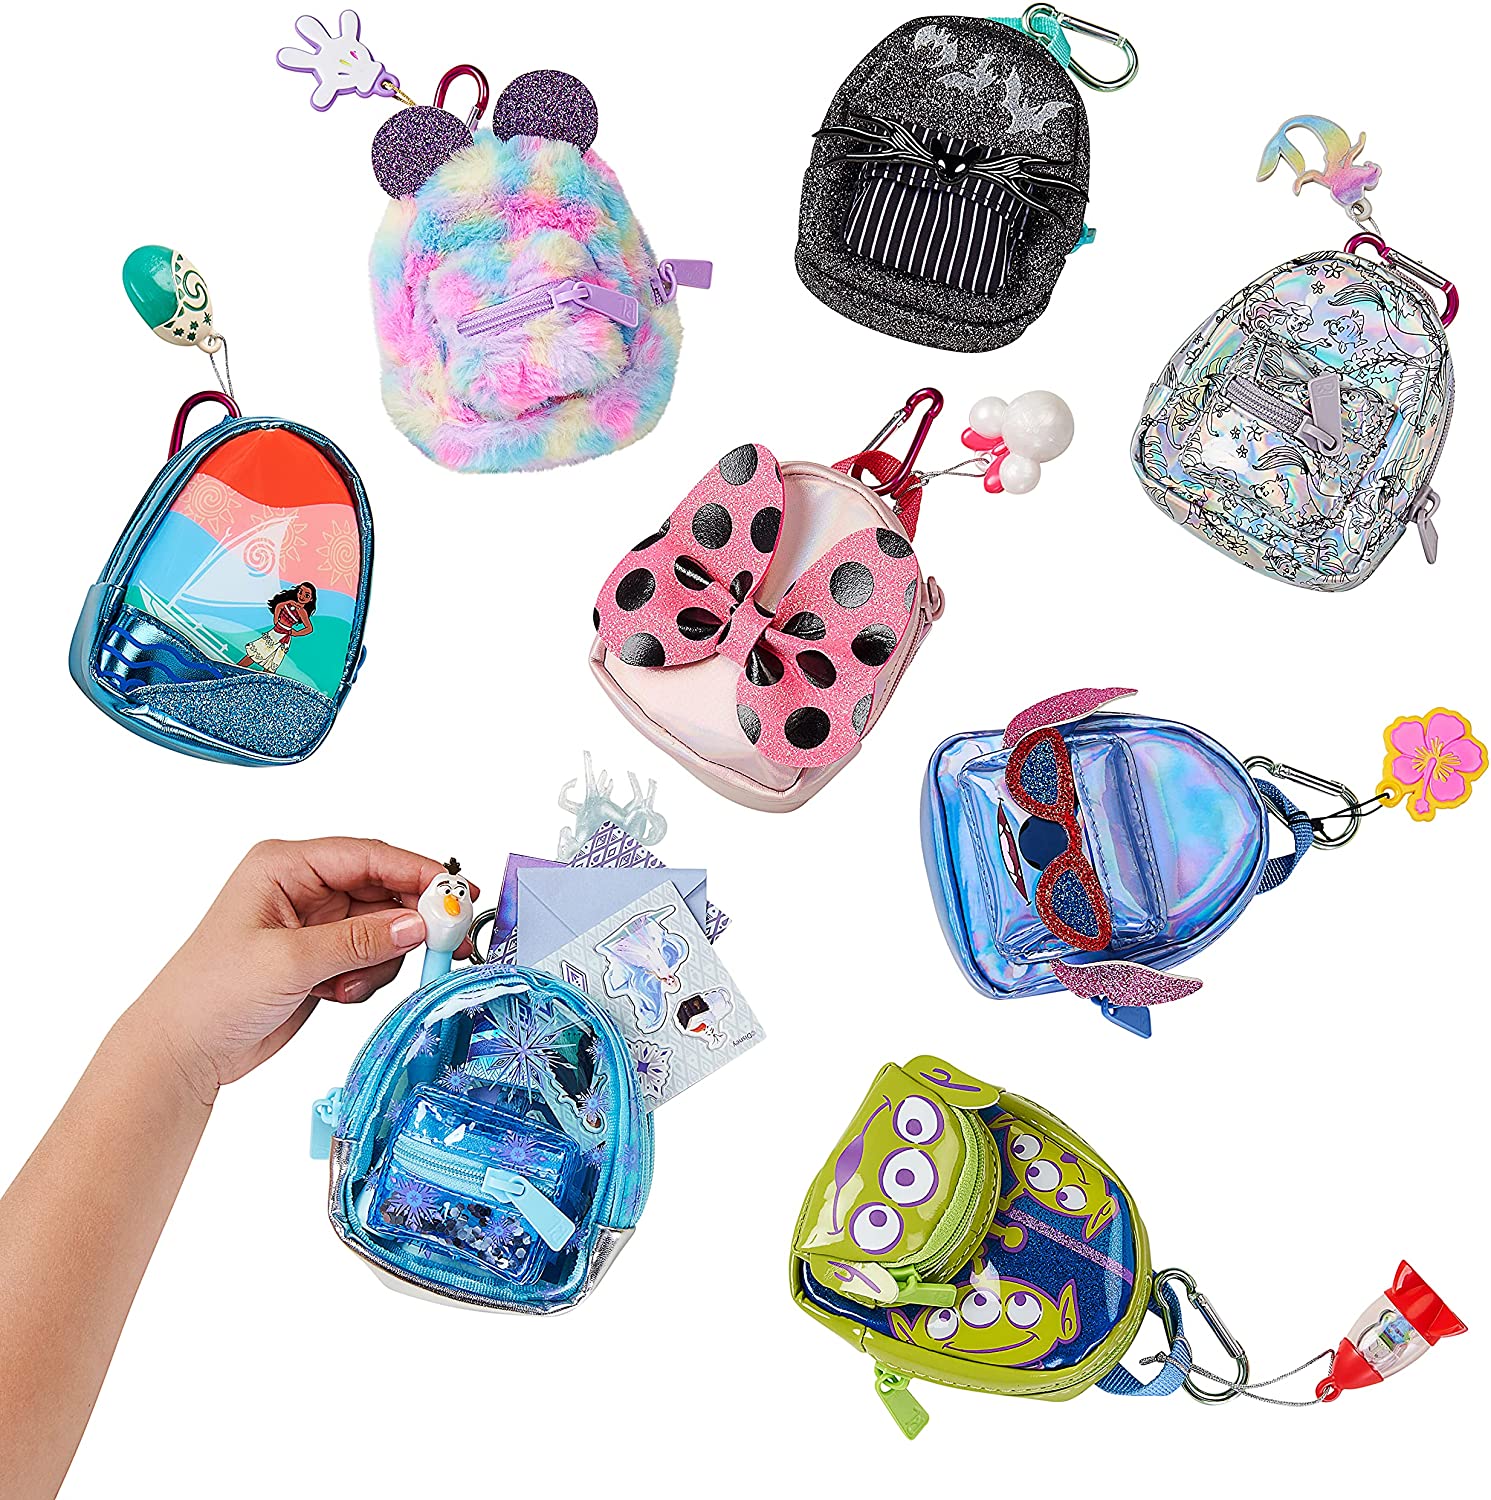 Real Littles - Collectible Micro Bags with 6 surprises inside!